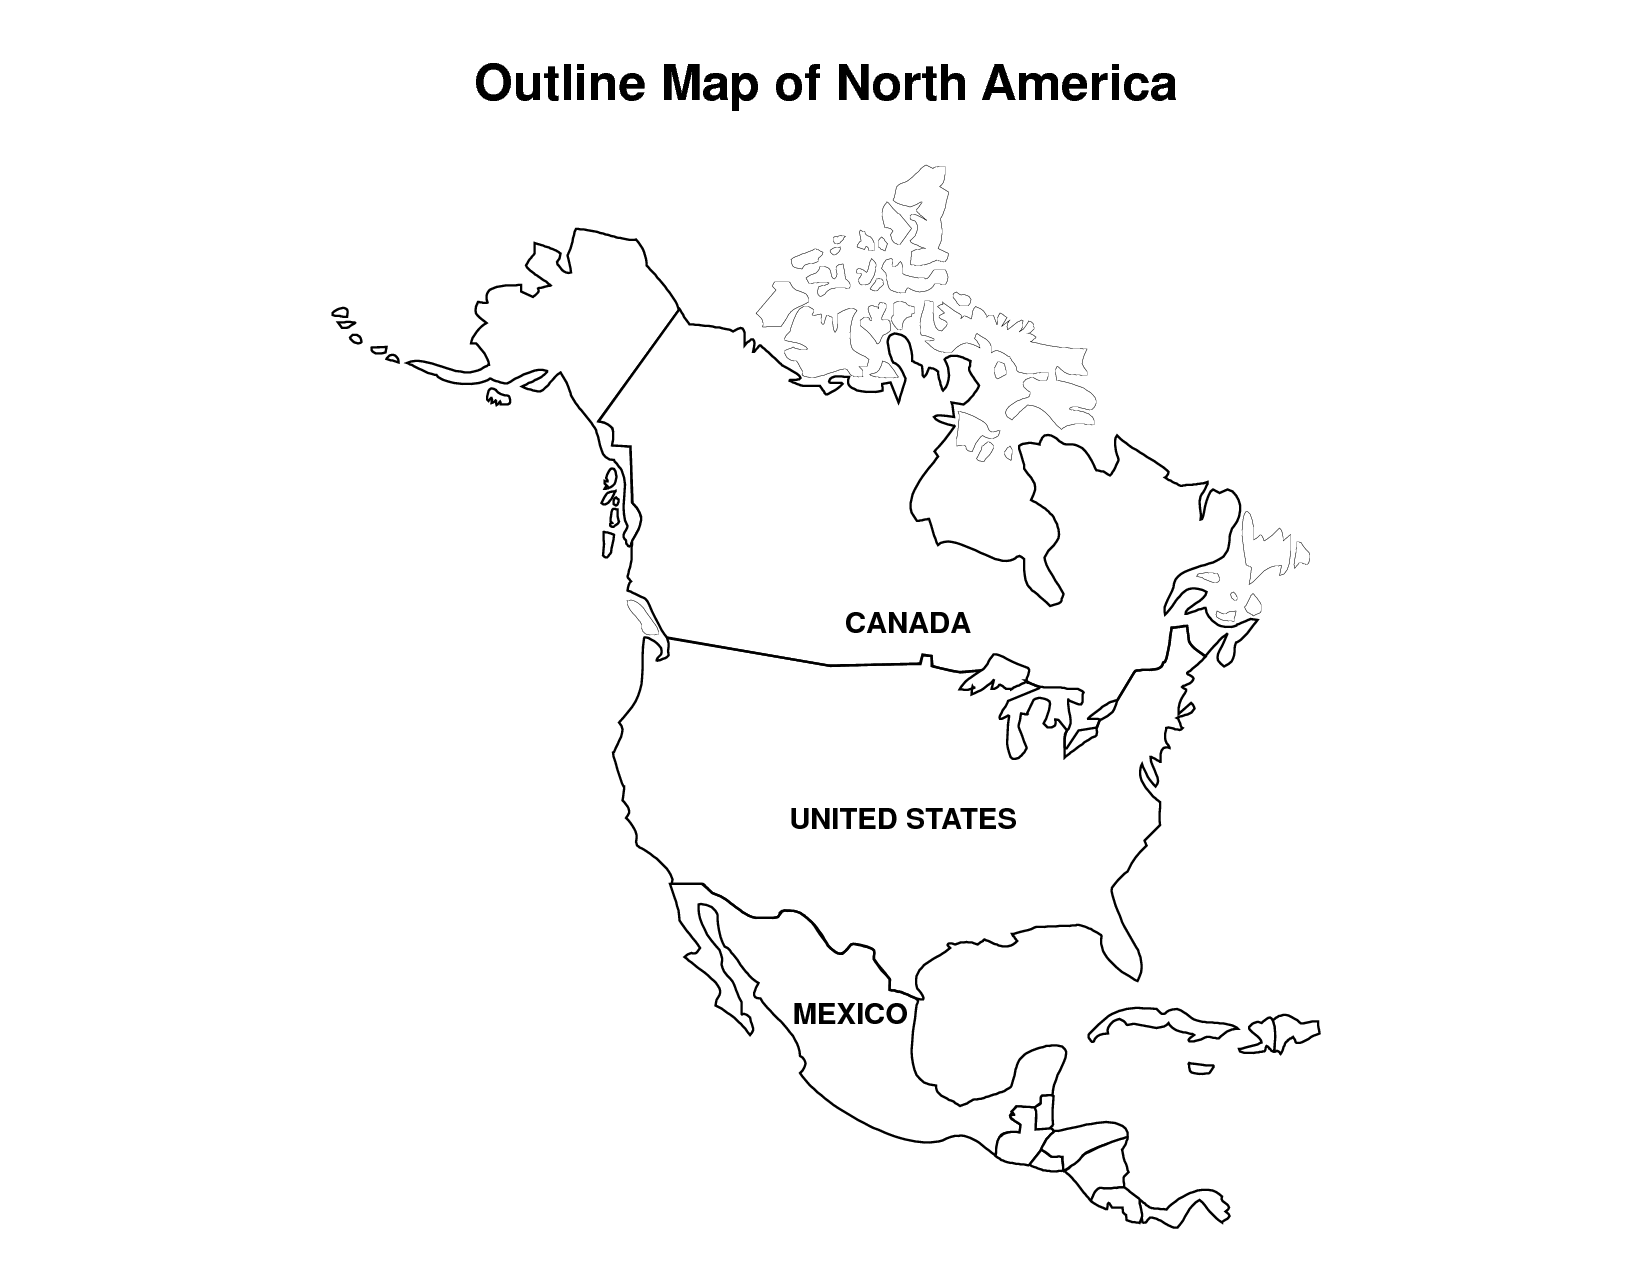 Blank Outline Map North America Image